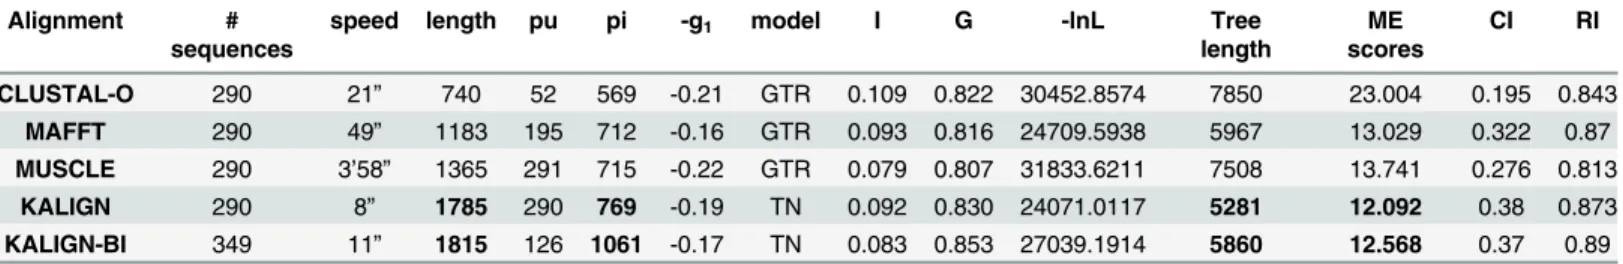 Table 1. Sequence and alignment statistics. Pu, parsimony uninformative characters; pi, parsimony informative characters;-g 1 statistics, the amount of phylogenetic signal versus noise; model, model of molecular evolution inferred by Modeltest; I, proporti